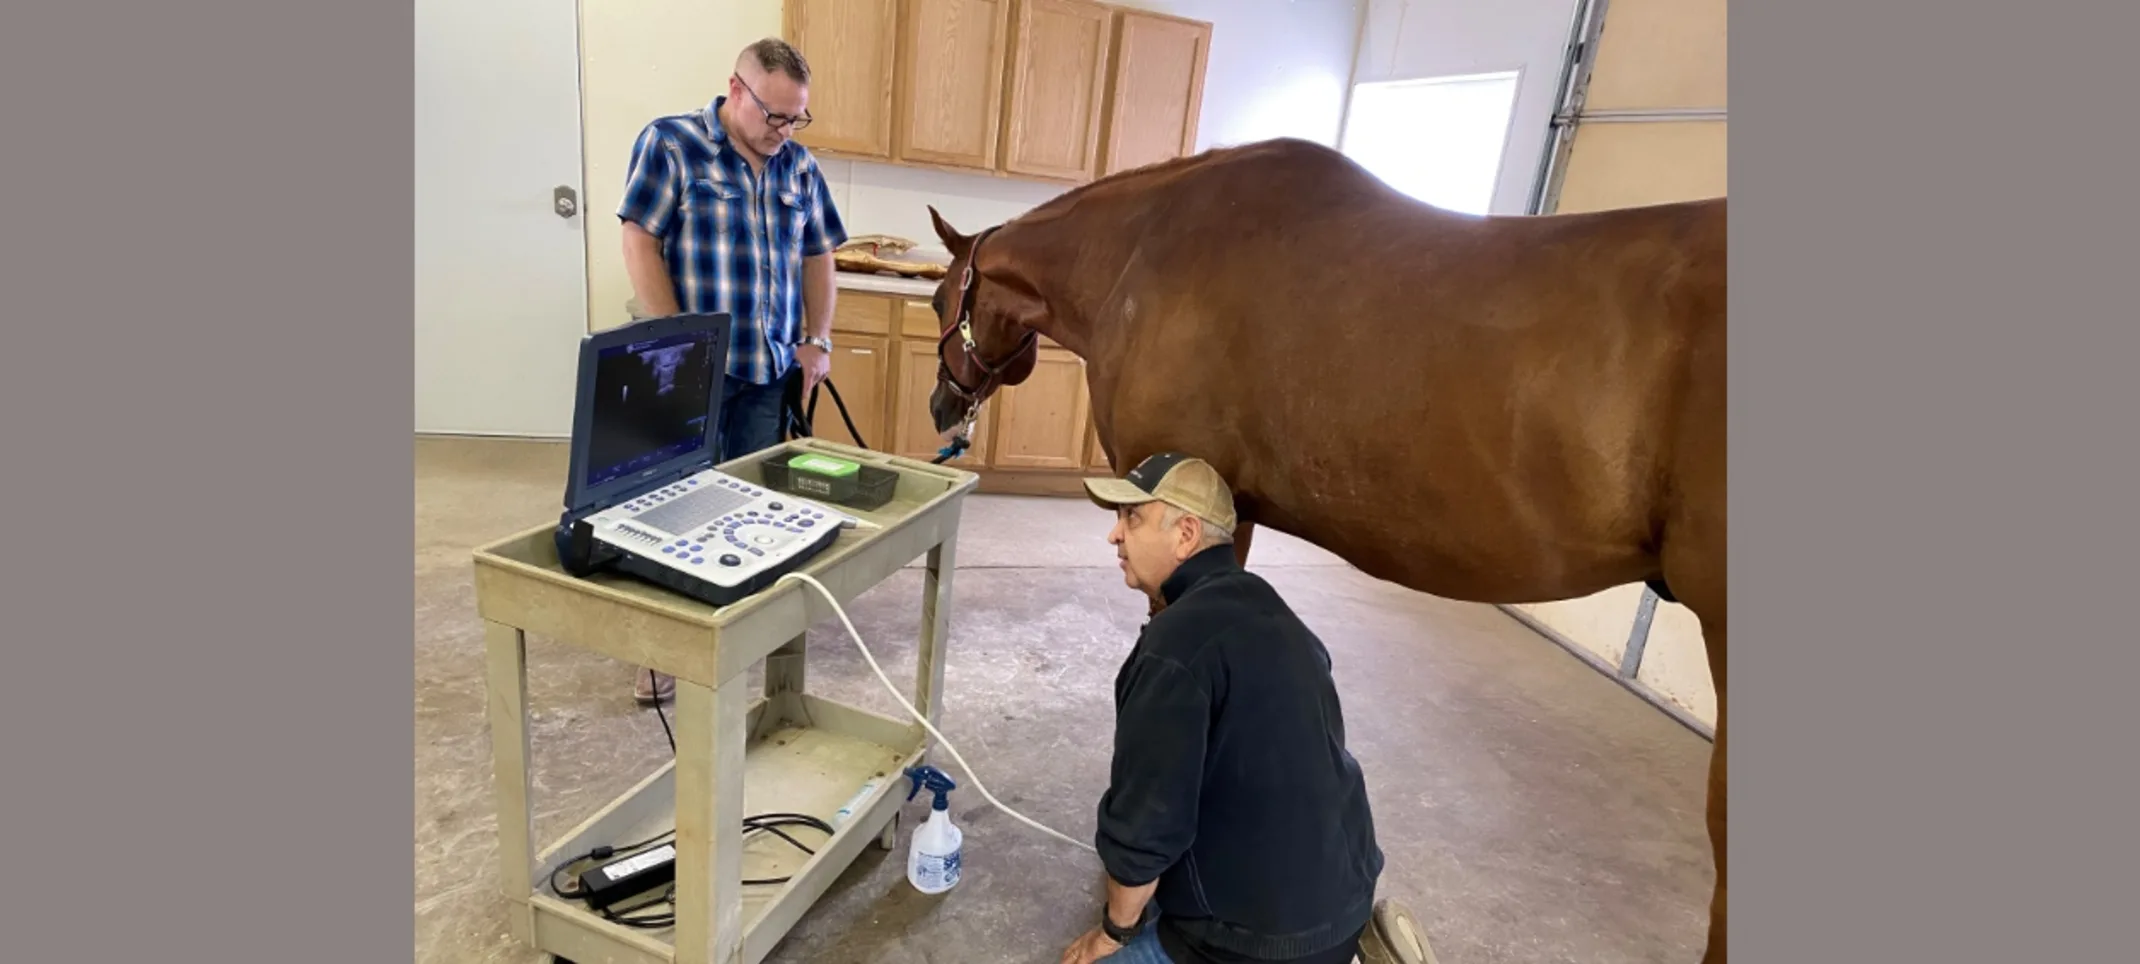 Dr. Abraham conducting an equine ultrasound